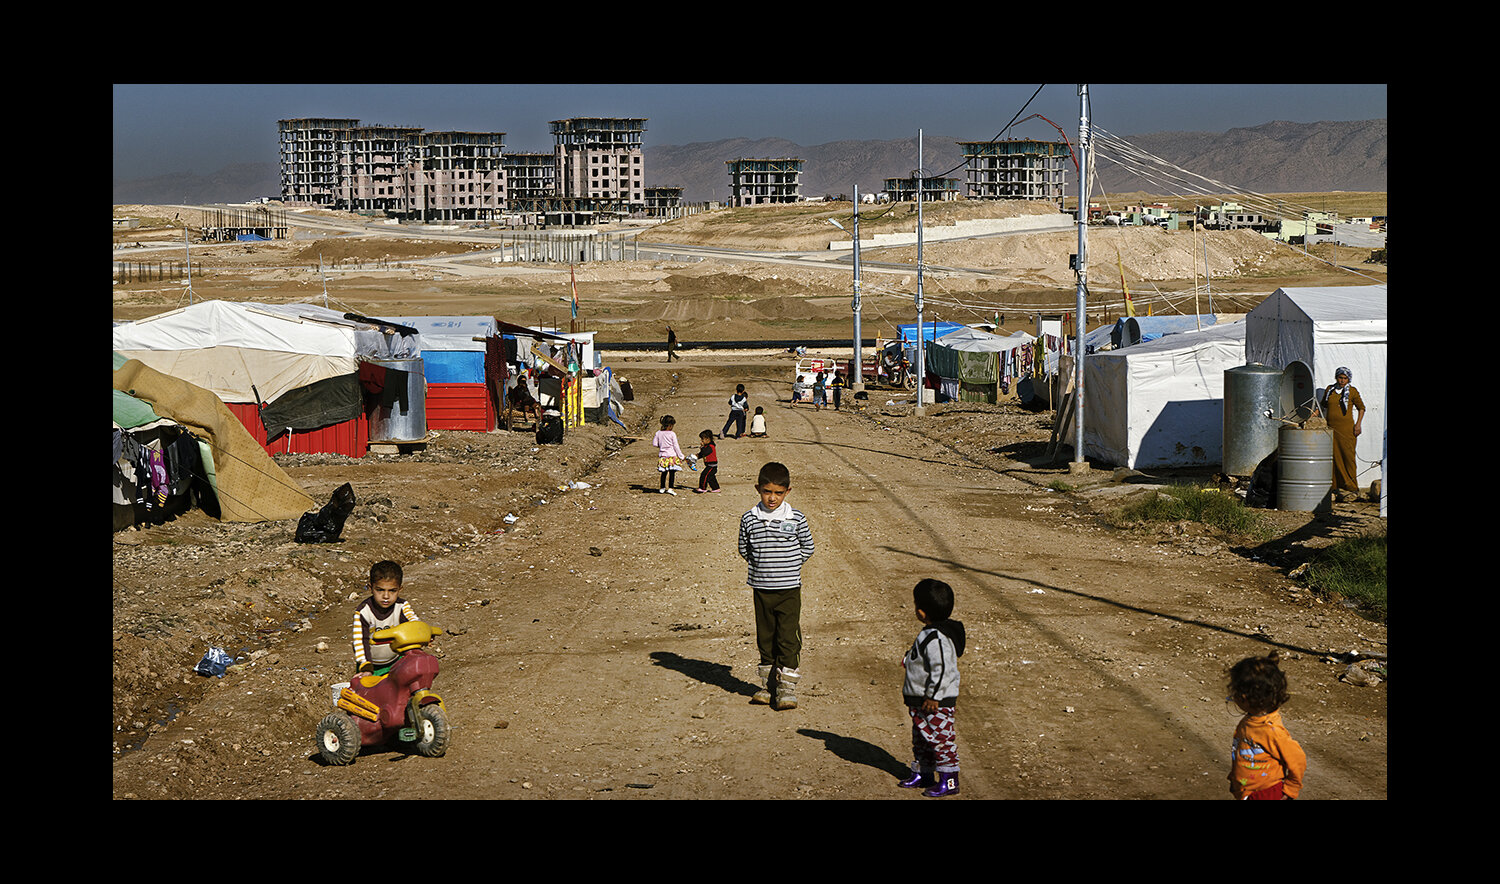  Children play in the Domiz camp for Syrian refugees just outside of Dohik, Iraq. 2013 